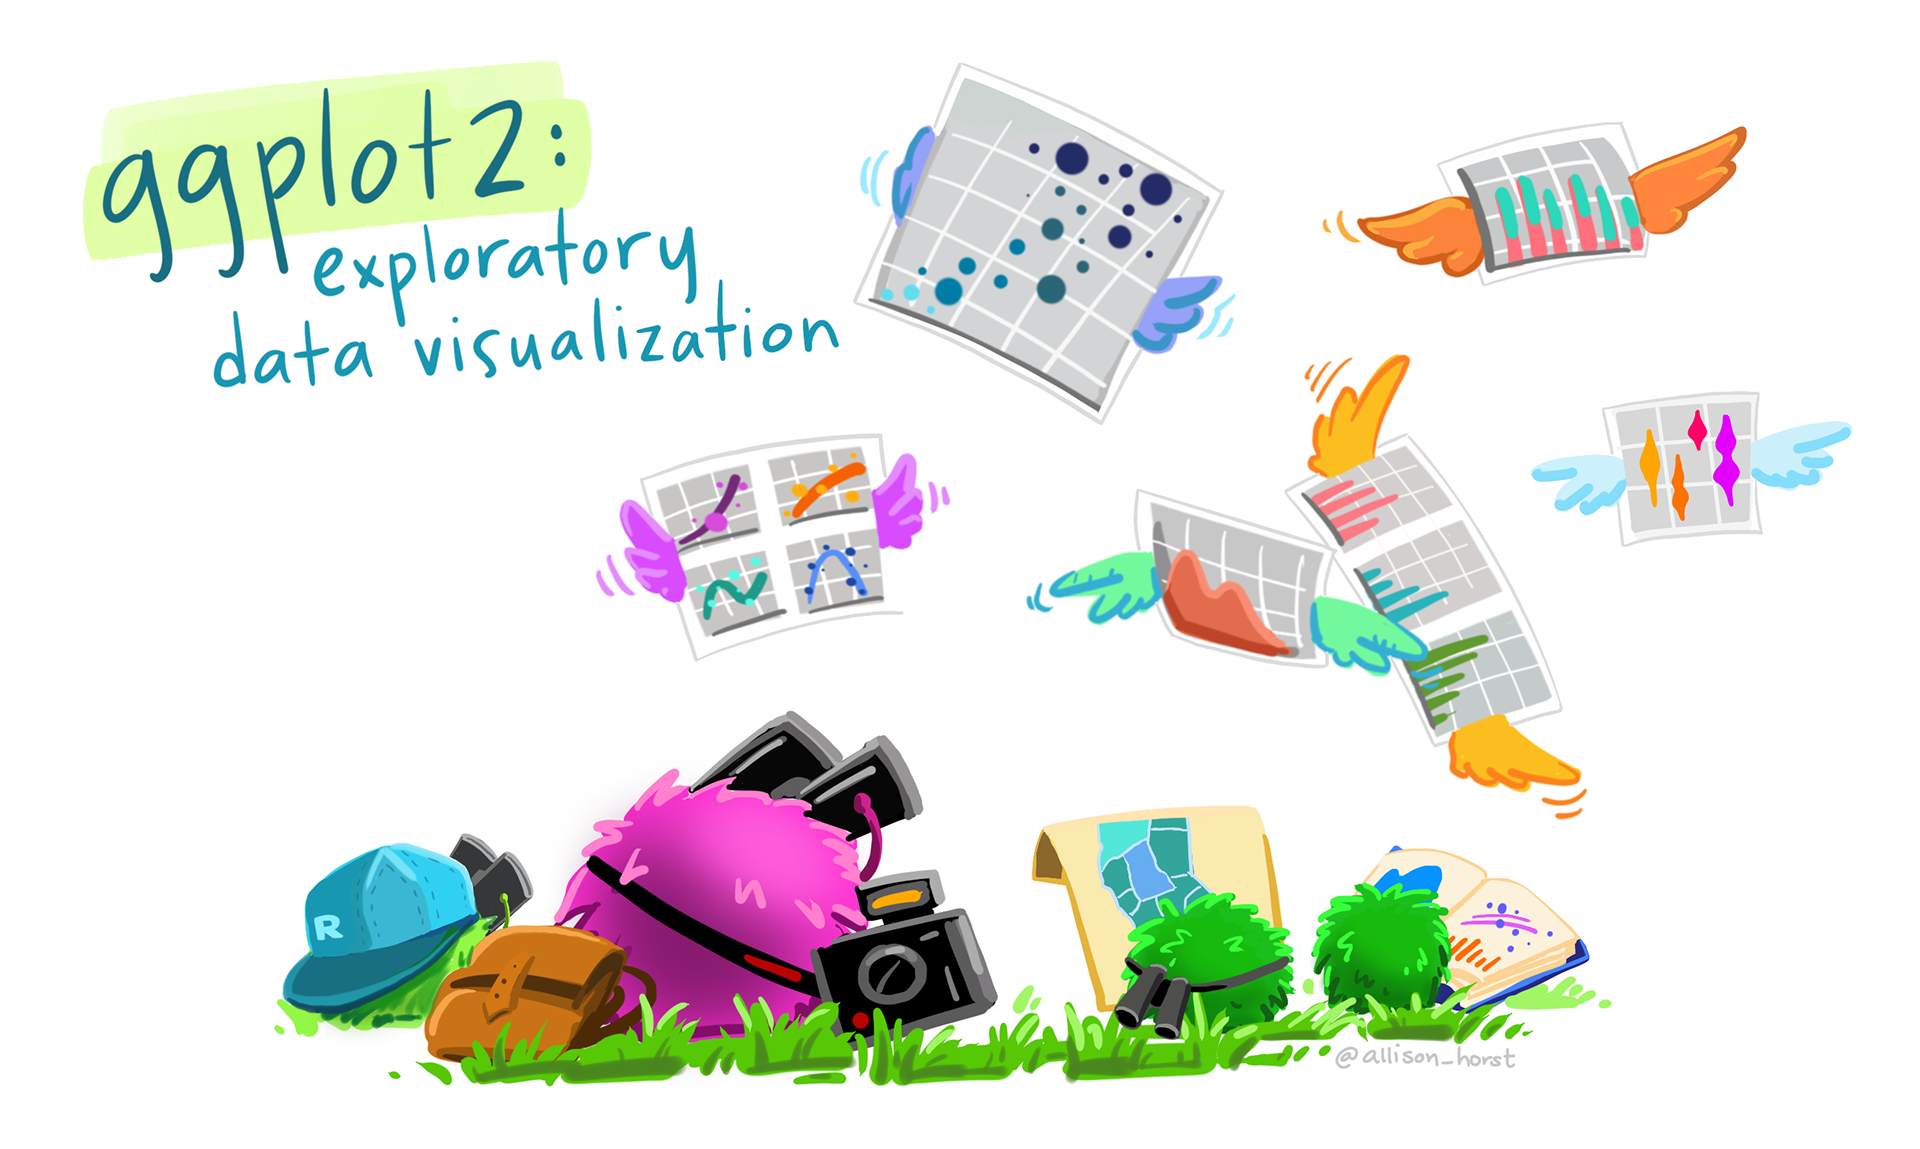 A group of fuzzy round monsters with binoculars, backpacks and guide books looking up a graphs flying around with wings (like birders, but with exploratory data visualizations). Stylized text reads 'ggplot2: visual data exploration.' Learn more about ggplot2.